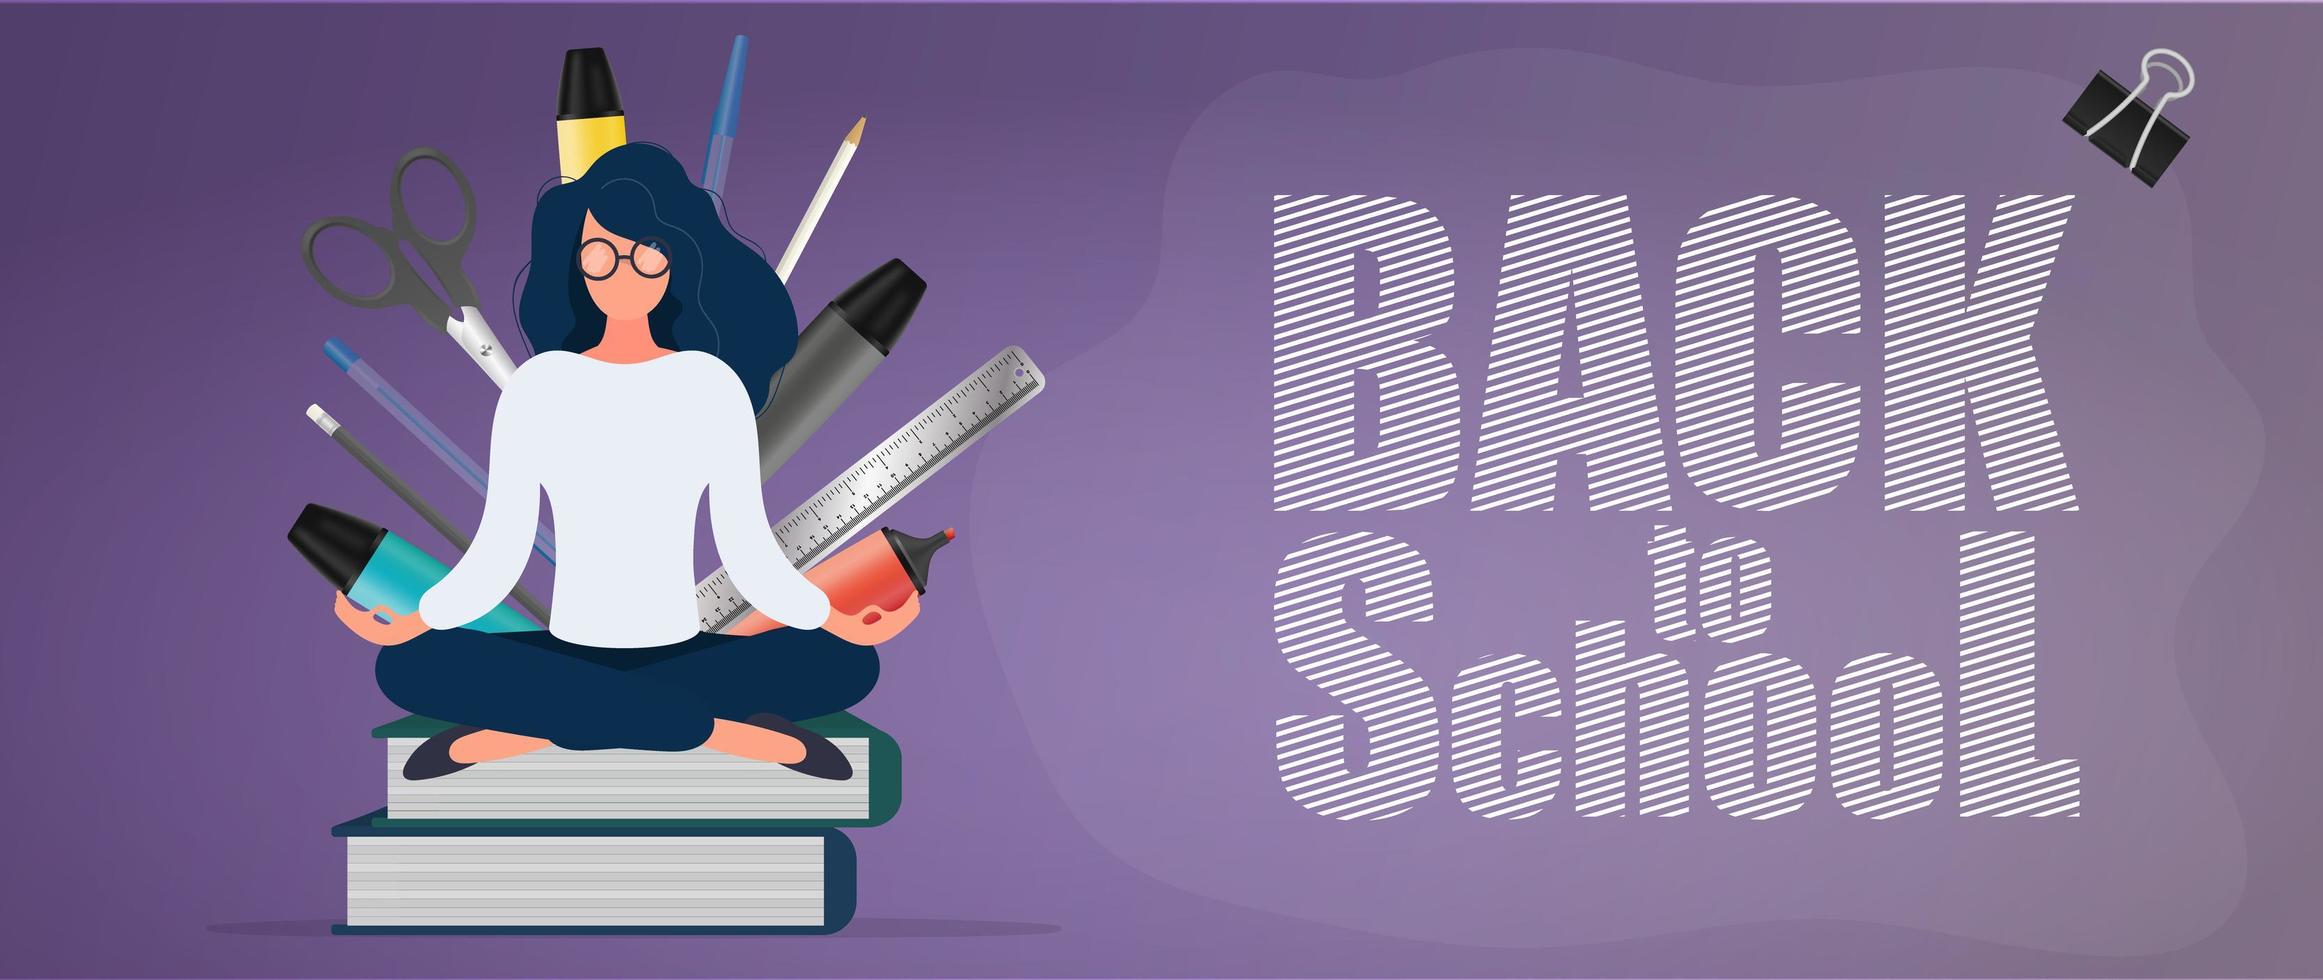 Back to school banner. A girl with glasses sits on a stack of books. Stationery, leather sheaths, pens, pencils, markers, ruler. Concept for the start of the school season. Vector. vector